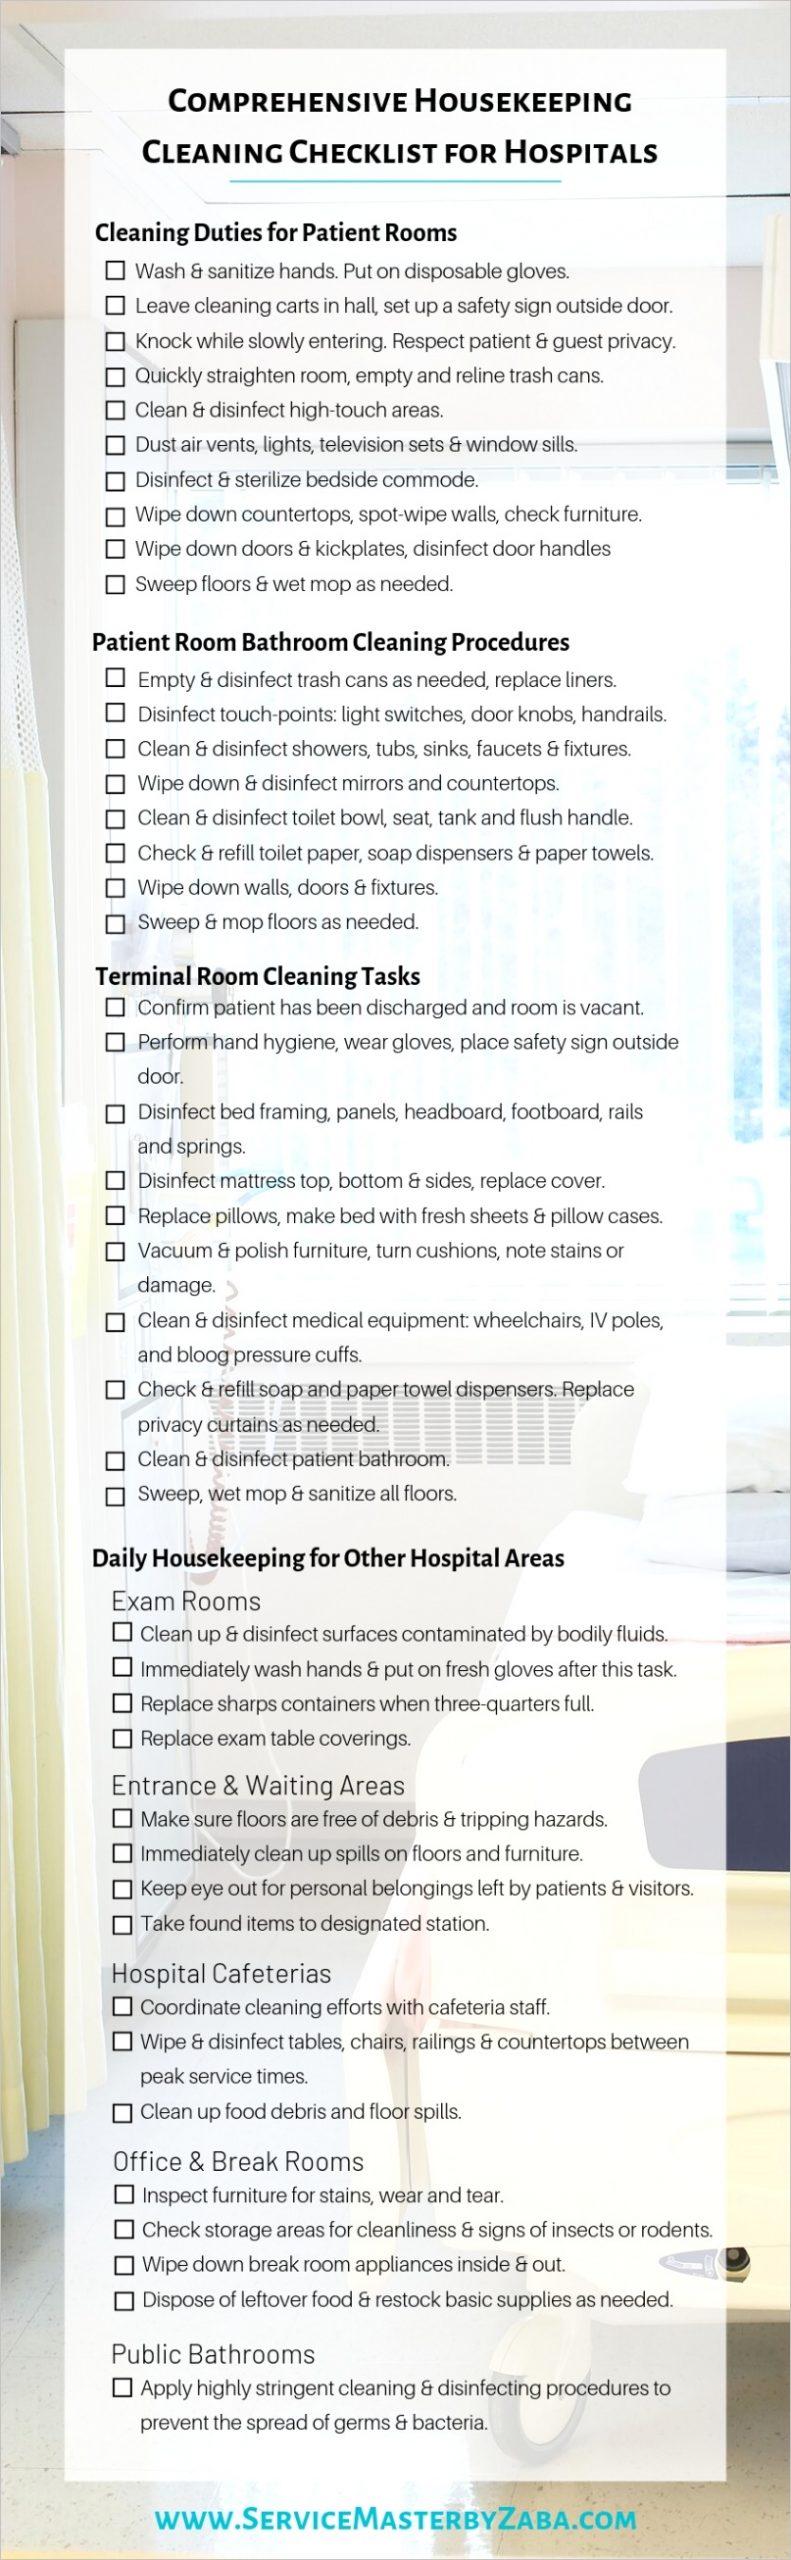 housekeeping cleaning checklist hospitals